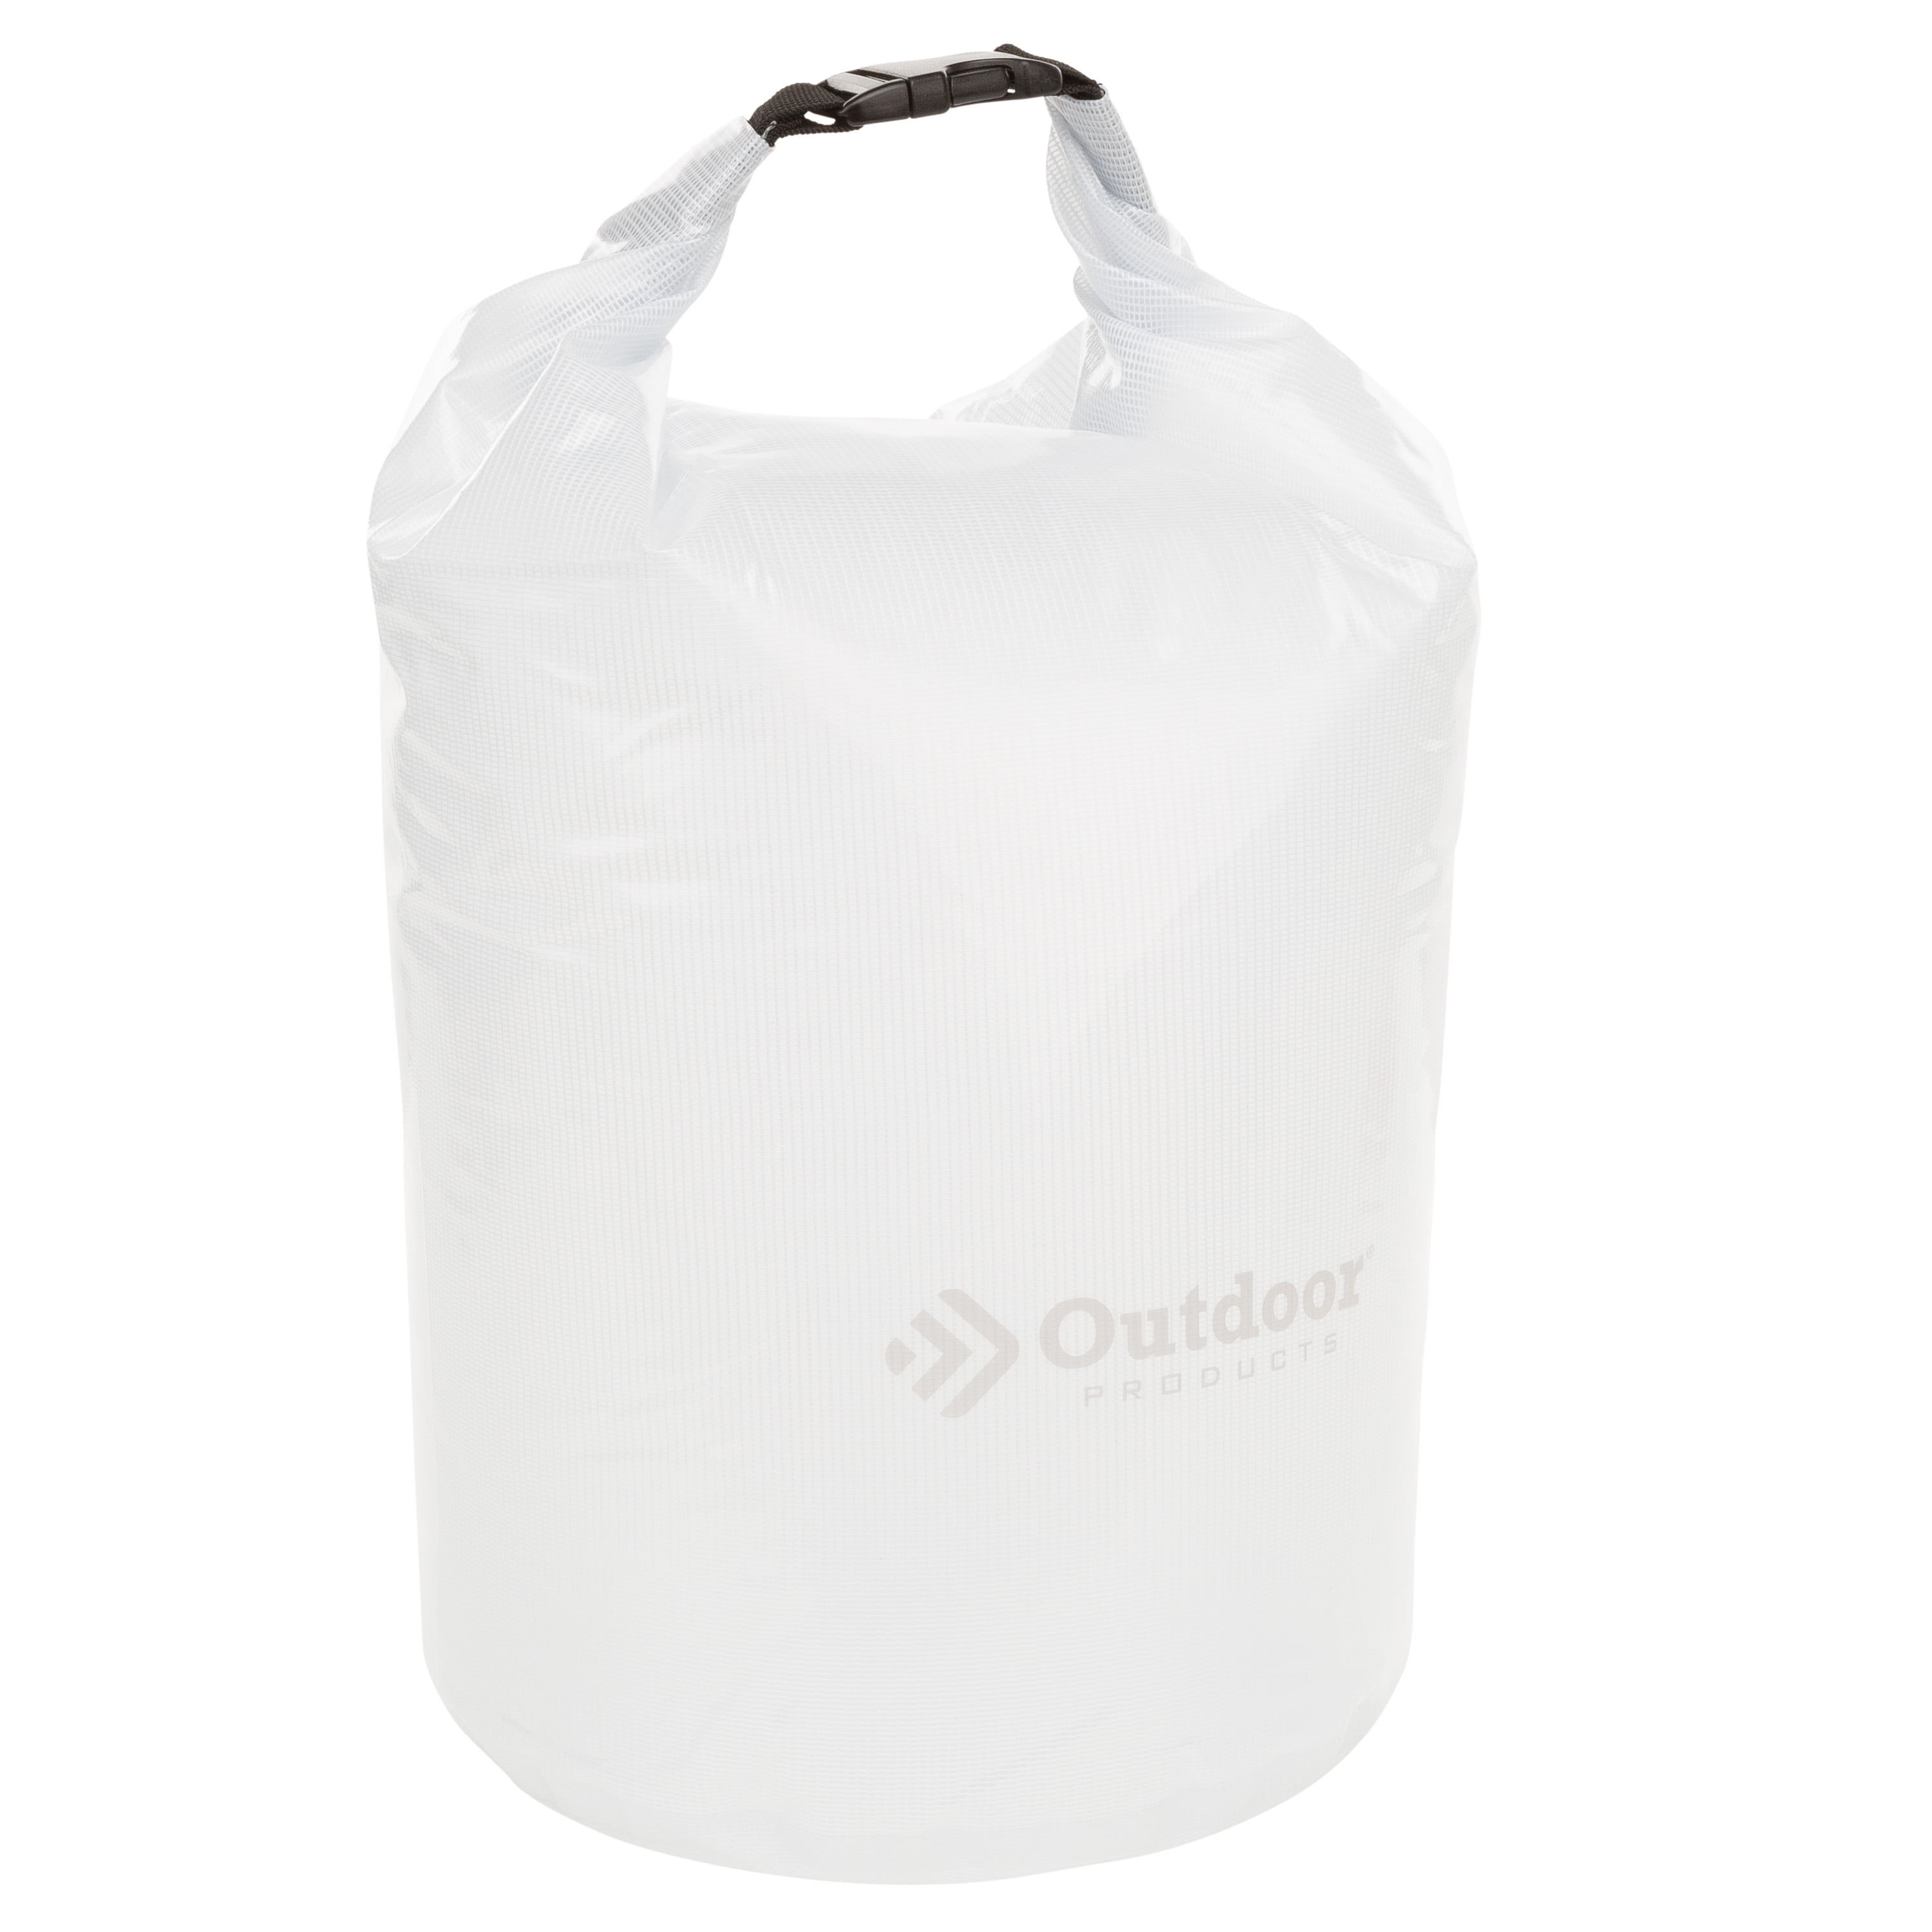 100 STRONG White Plastic Vest SHAPED SHOPPING Carrier Bags-Choice of Sizes 